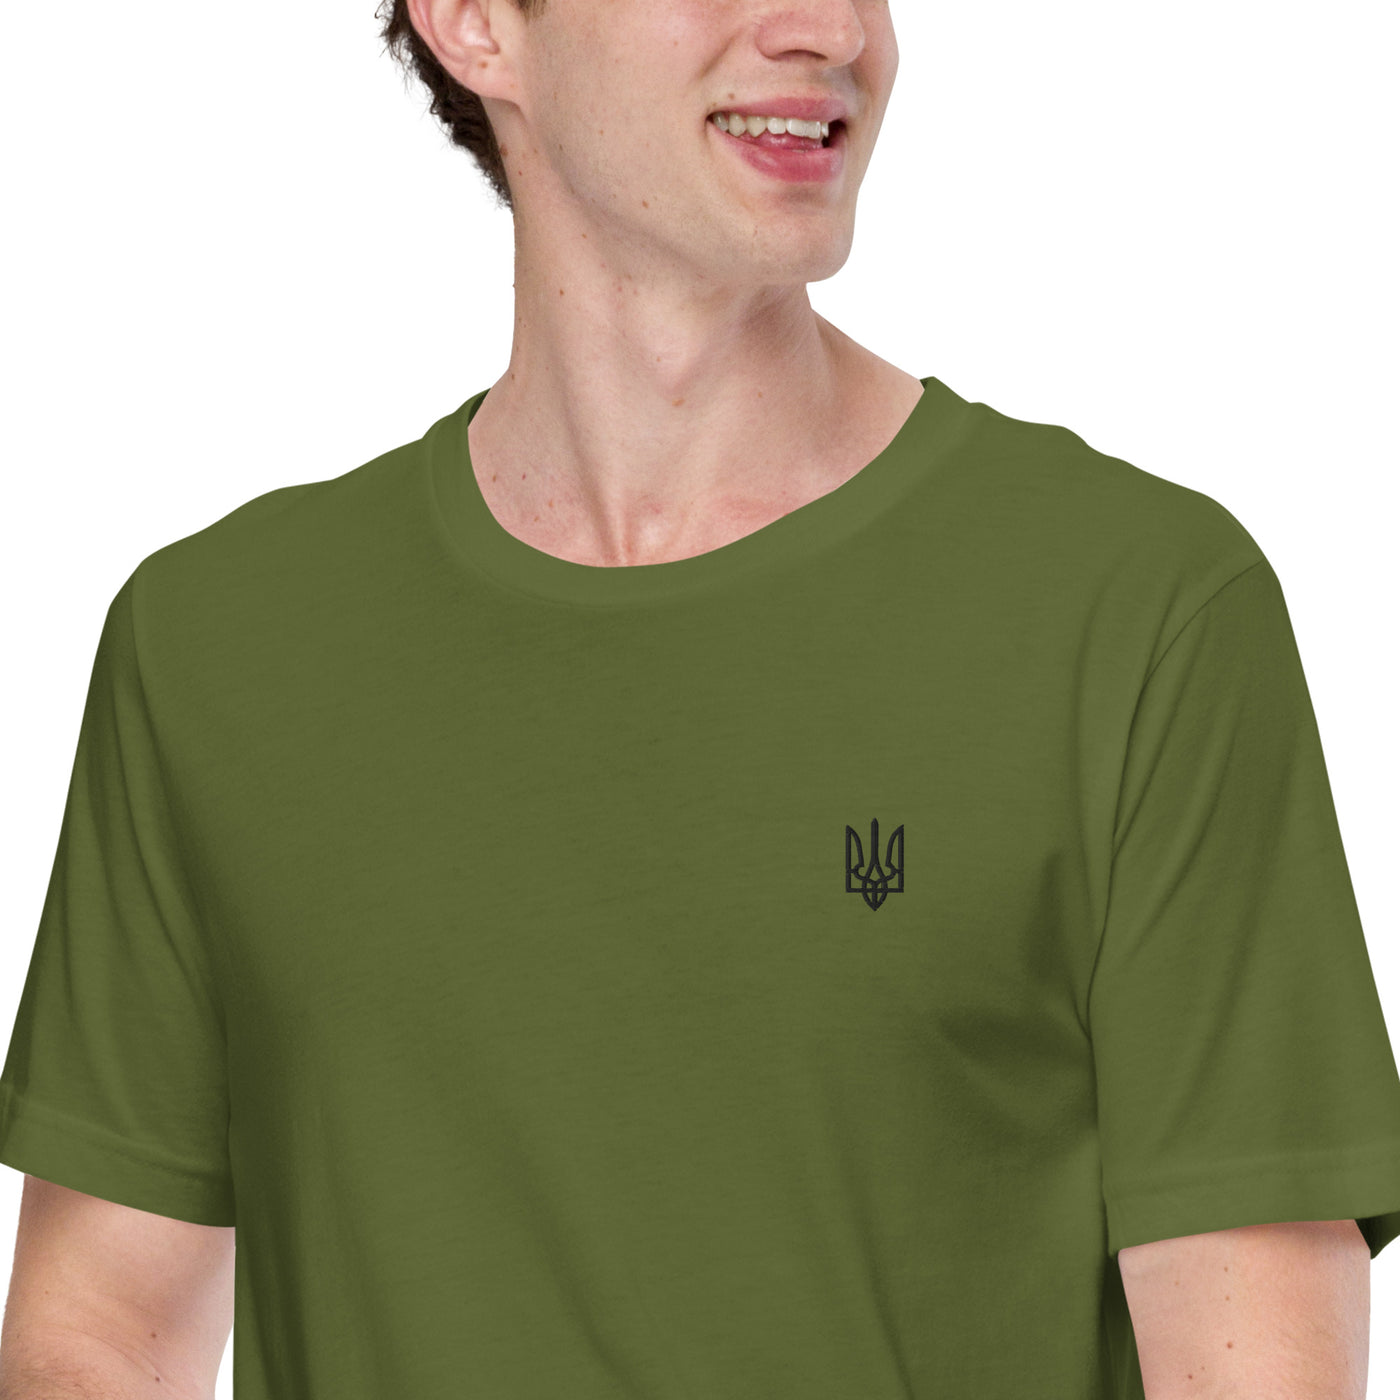 Trident of Freedom Zelensky Green T-shirt Embroidery